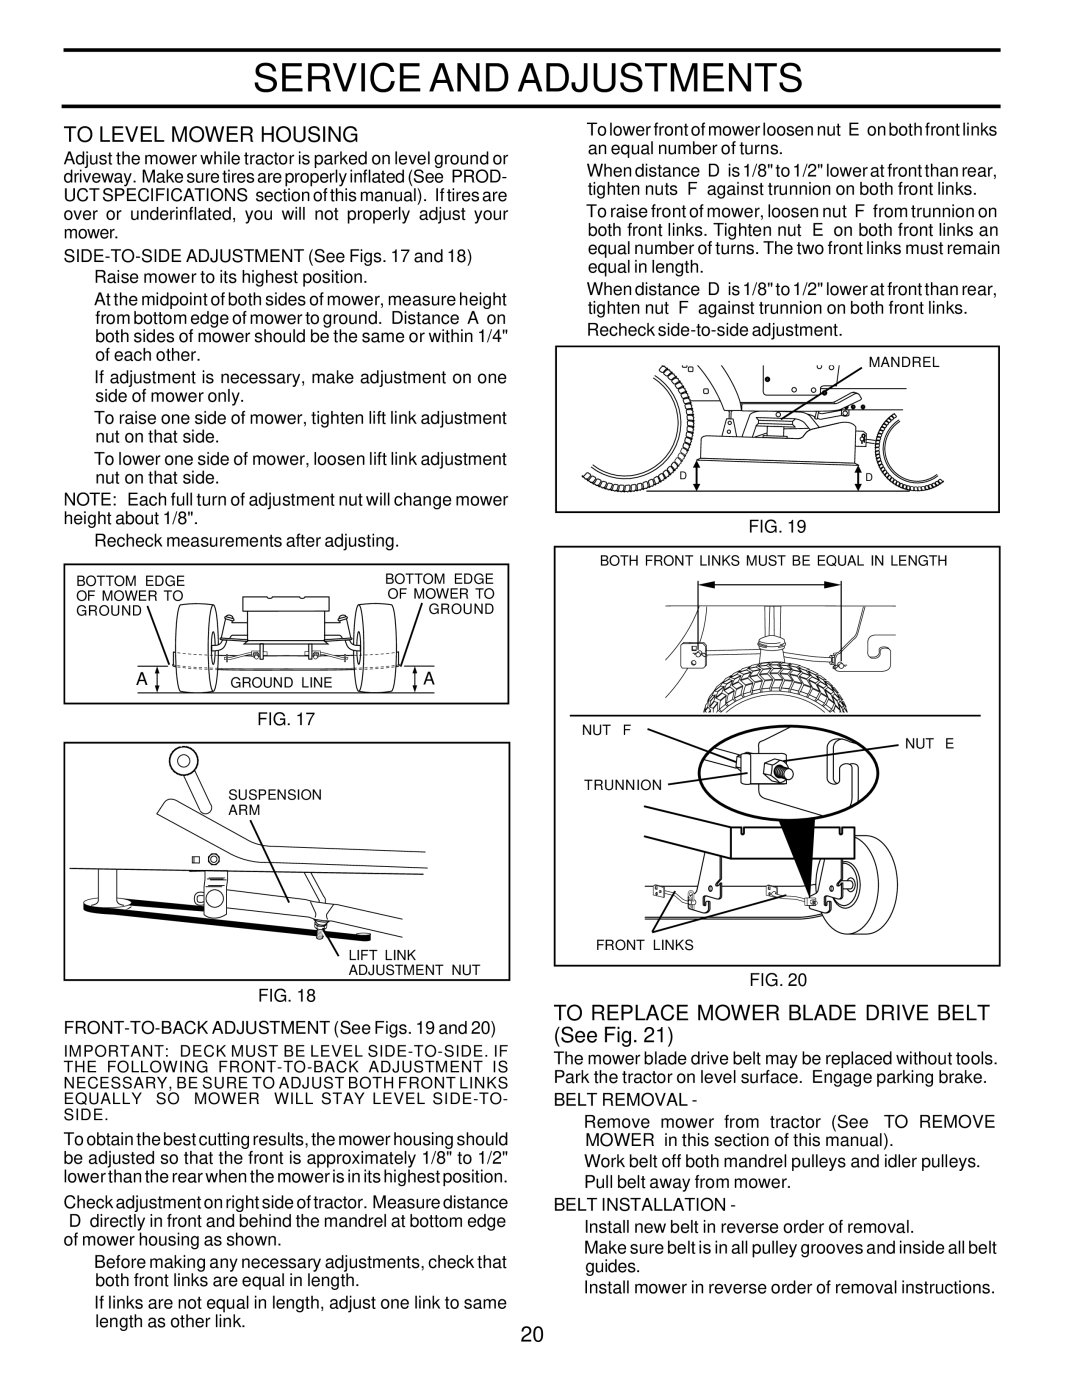 Poulan PR1842STC owner manual To Level Mower Housing, To Replace Mower Blade Drive Belt See Fig 